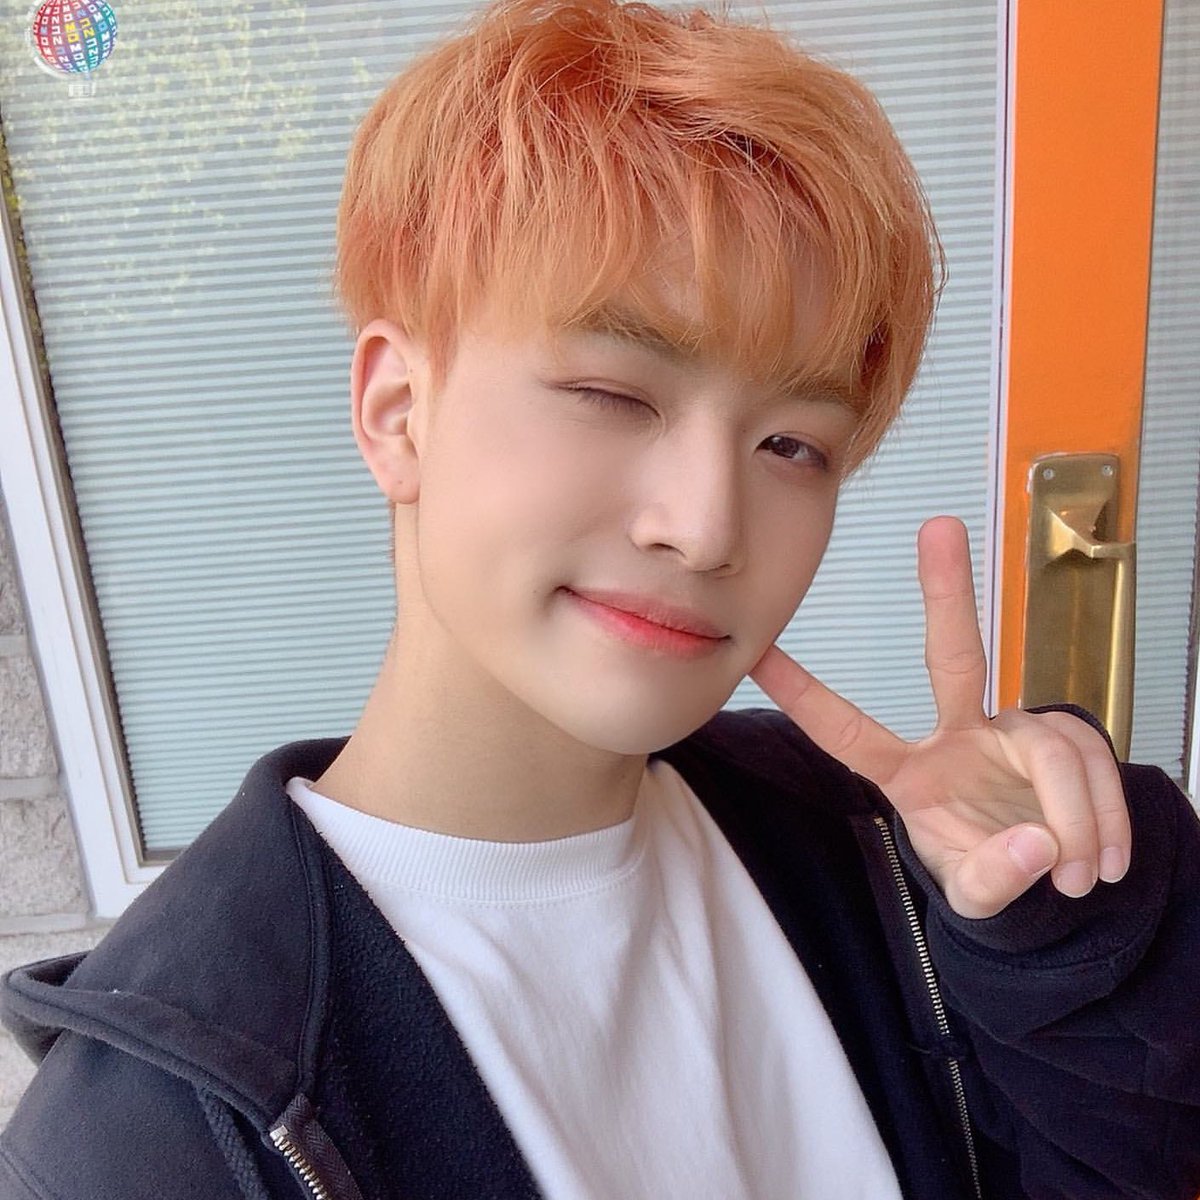 bic : seungmin⇢ the class clown ⇢ spaces out in class⇢ loud for no reason ⇢ happy virus !!⇢ the type to put memes in his presentation⇢ prob tiktok famous⇢ renegades randomly in class⇢ best friends w the guidance counselor⇢ embodiment of sunshine